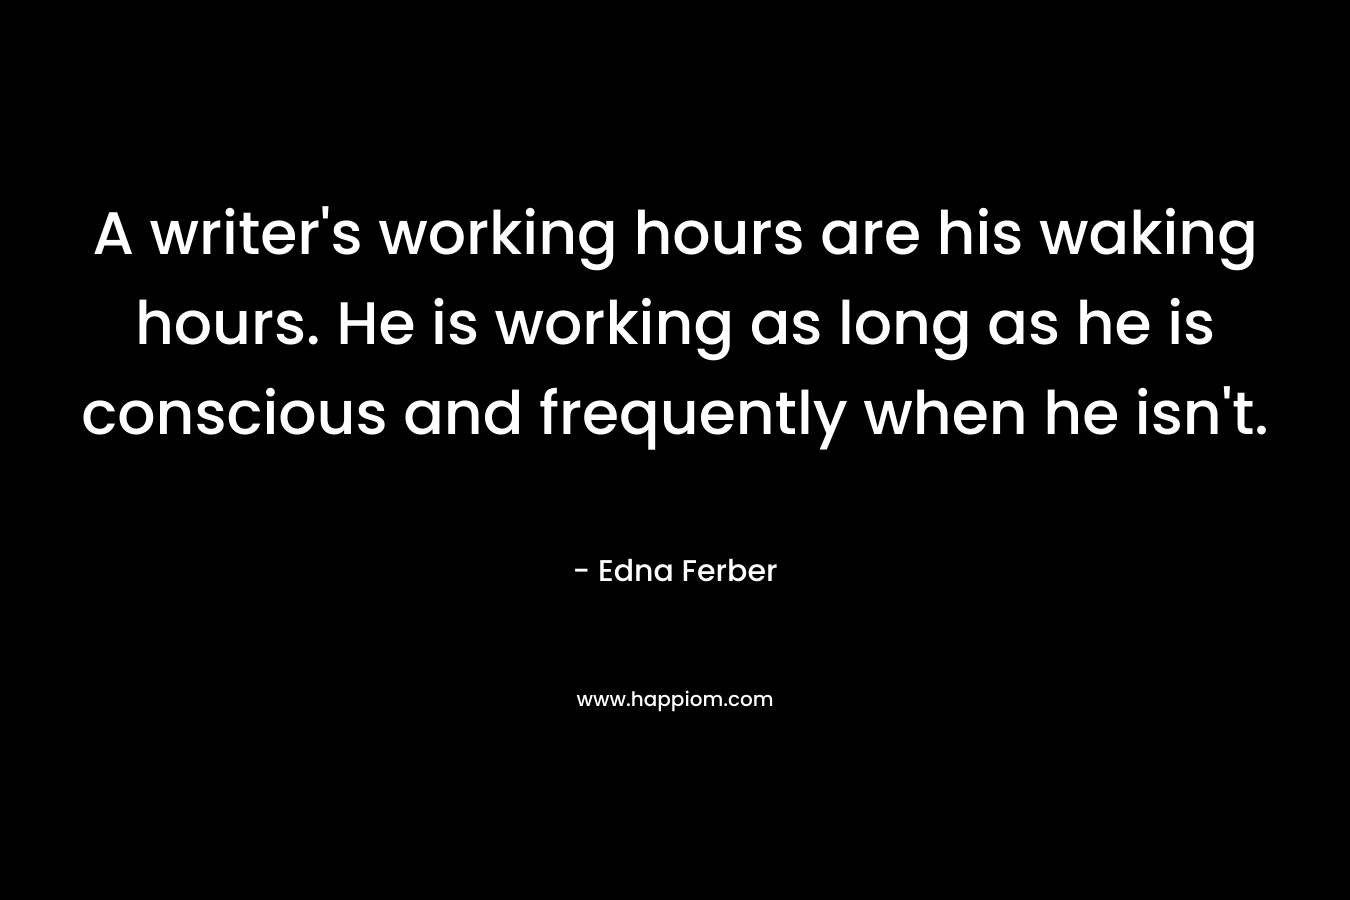 A writer’s working hours are his waking hours. He is working as long as he is conscious and frequently when he isn’t. – Edna Ferber